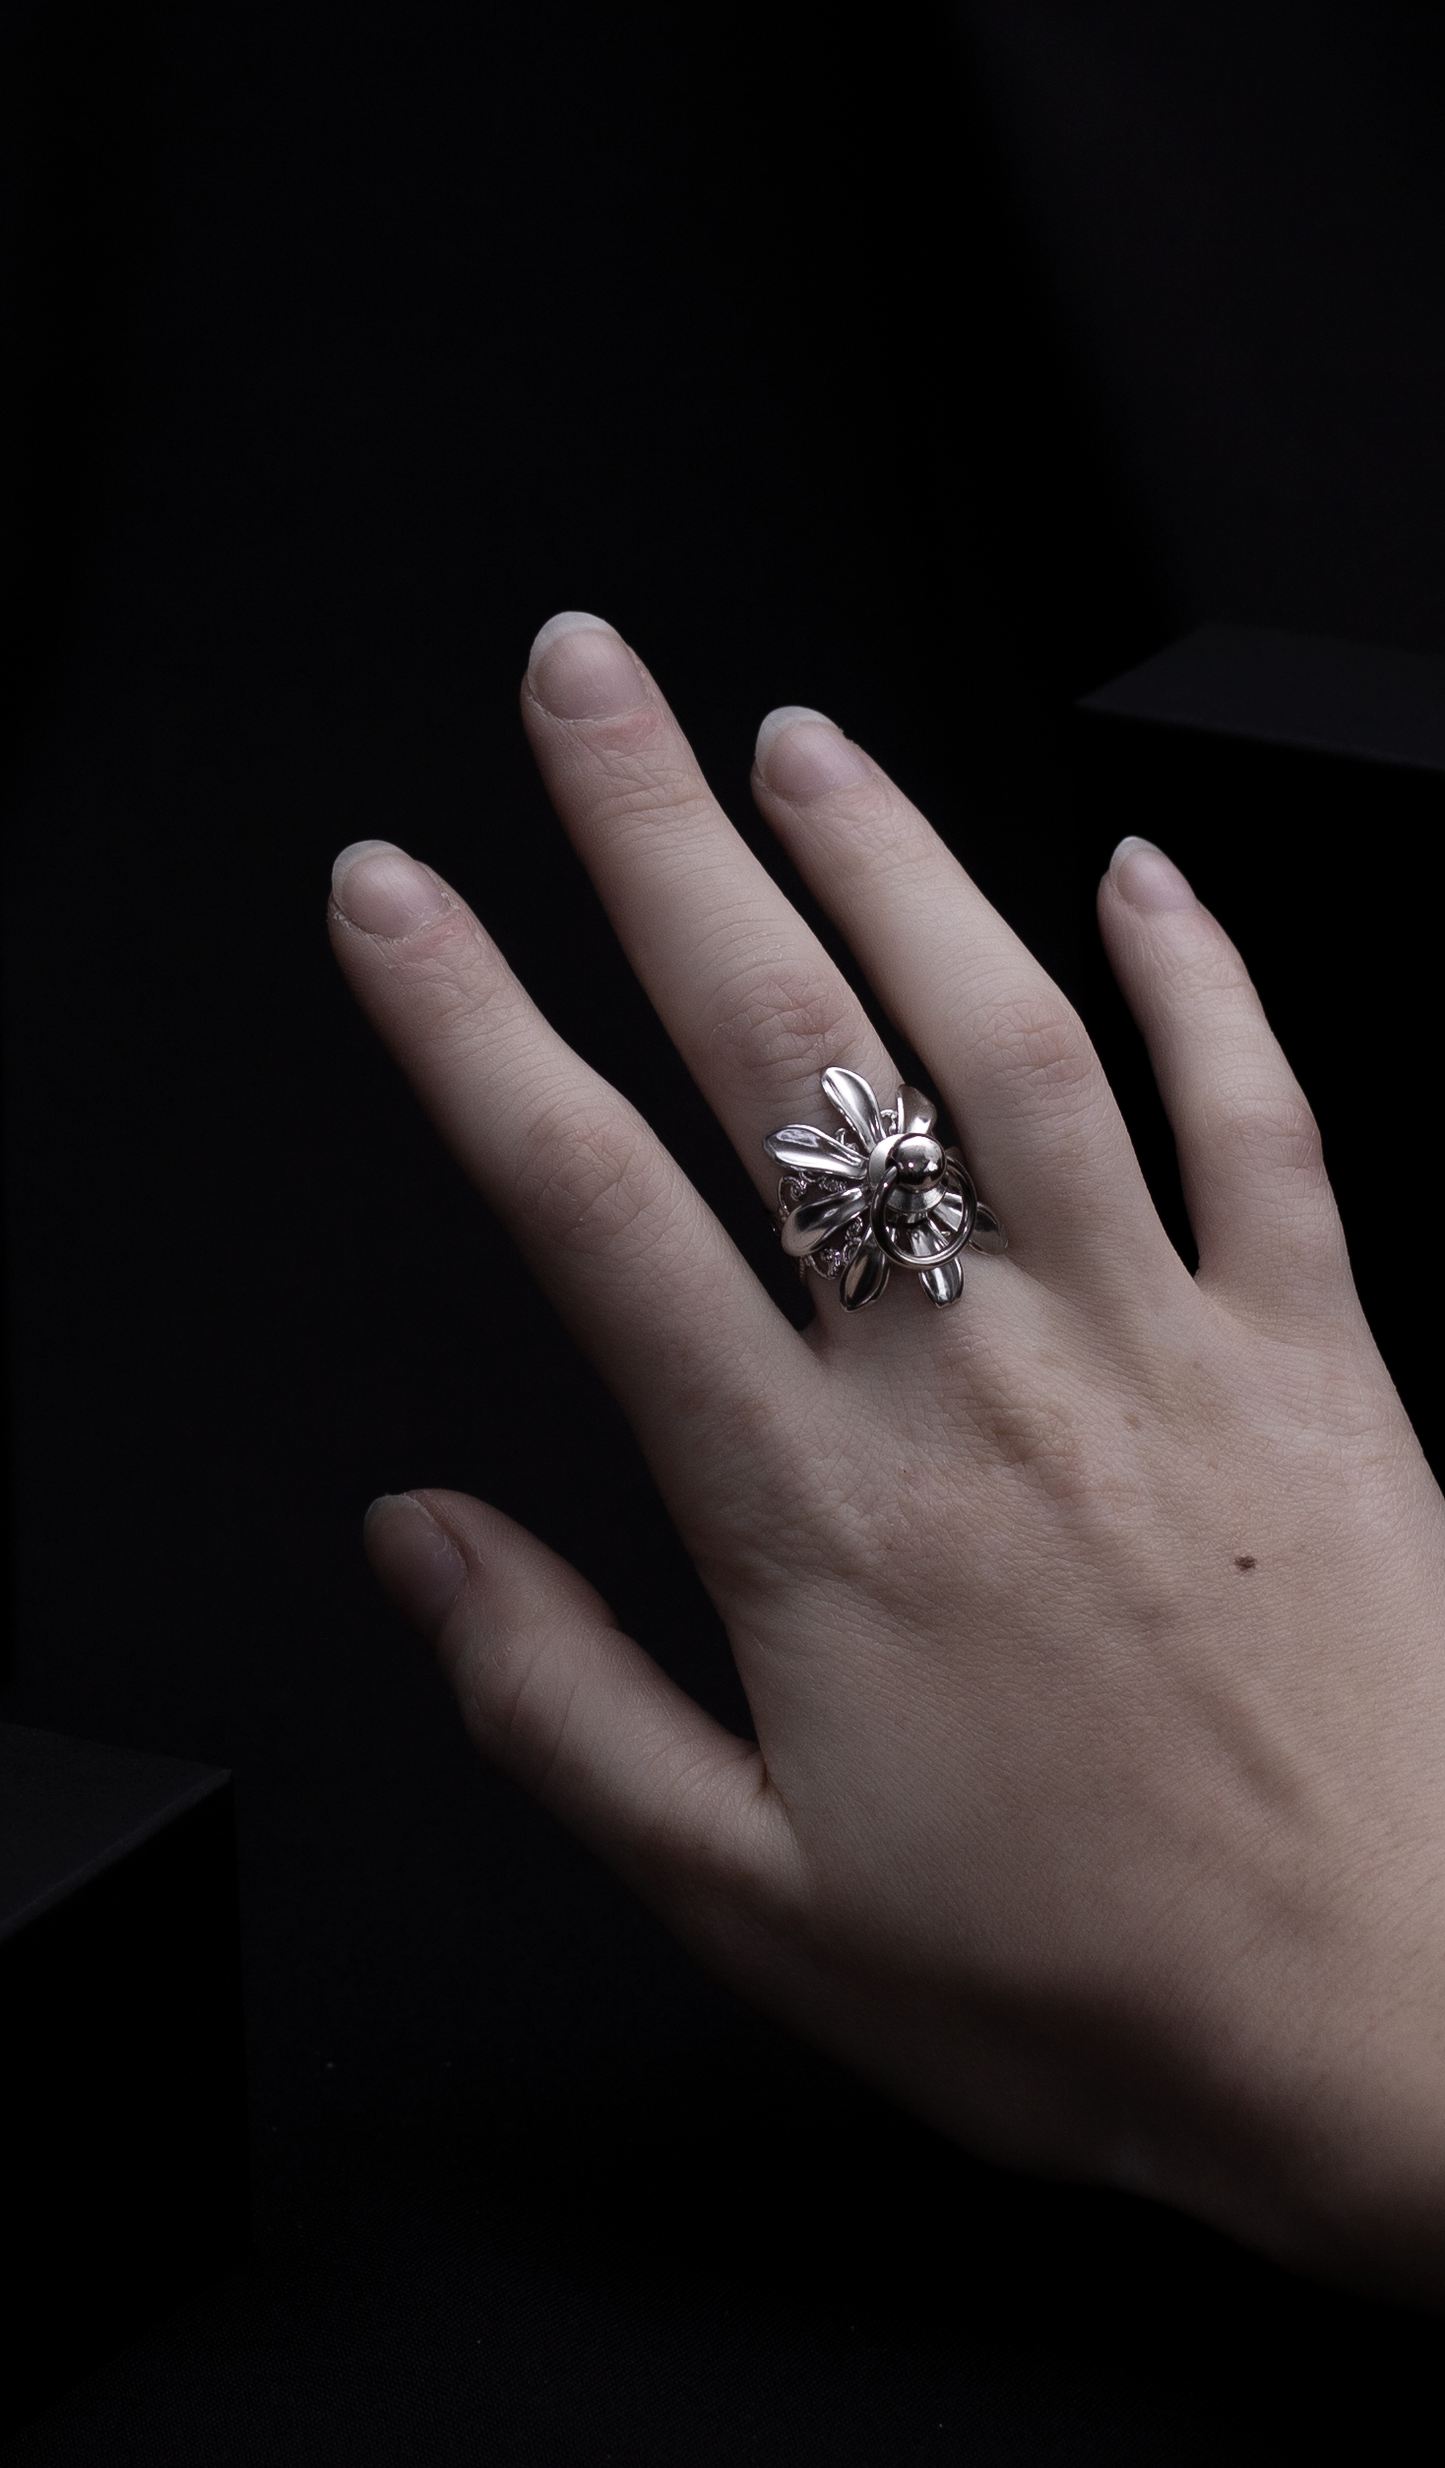 A solitary hand displays a Myril Jewels flower ring with o-ring stud in the middle, a masterpiece of dark-avantgarde jewelry with a punk twist. The ring's silver sheen and intricate floral design embody the luxurious, gothic aesthetic, a signature of Myril Jewels, catering to those with a penchant for bold, alternative fashion.